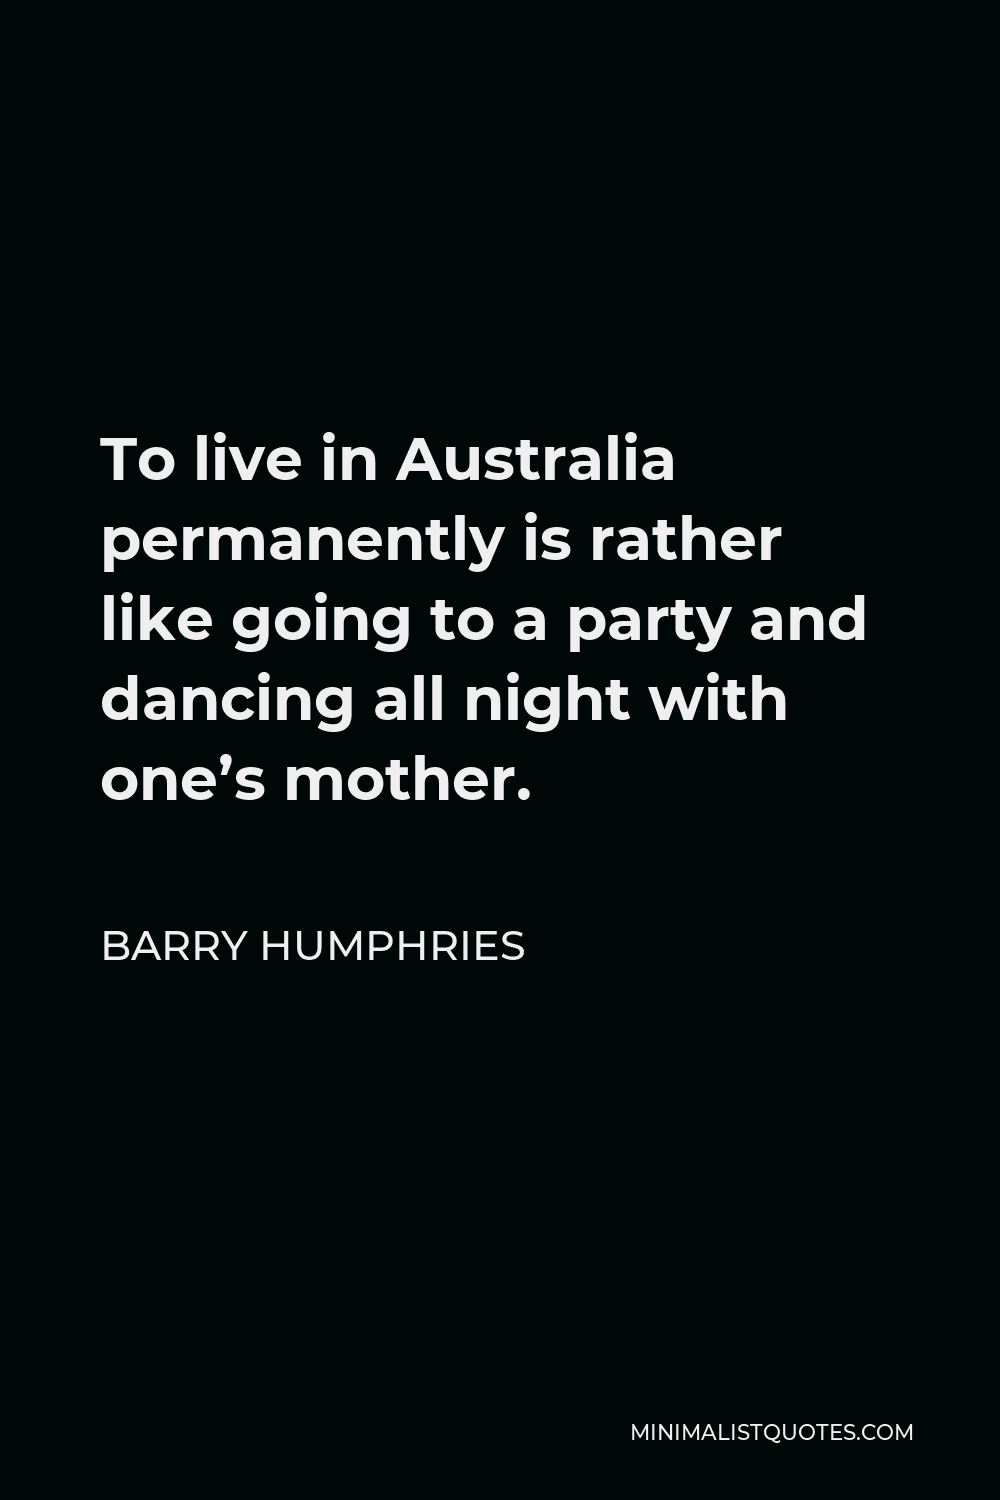 Barry Humphries Quote - To live in Australia permanently is rather like going to a party and dancing all night with one’s mother.